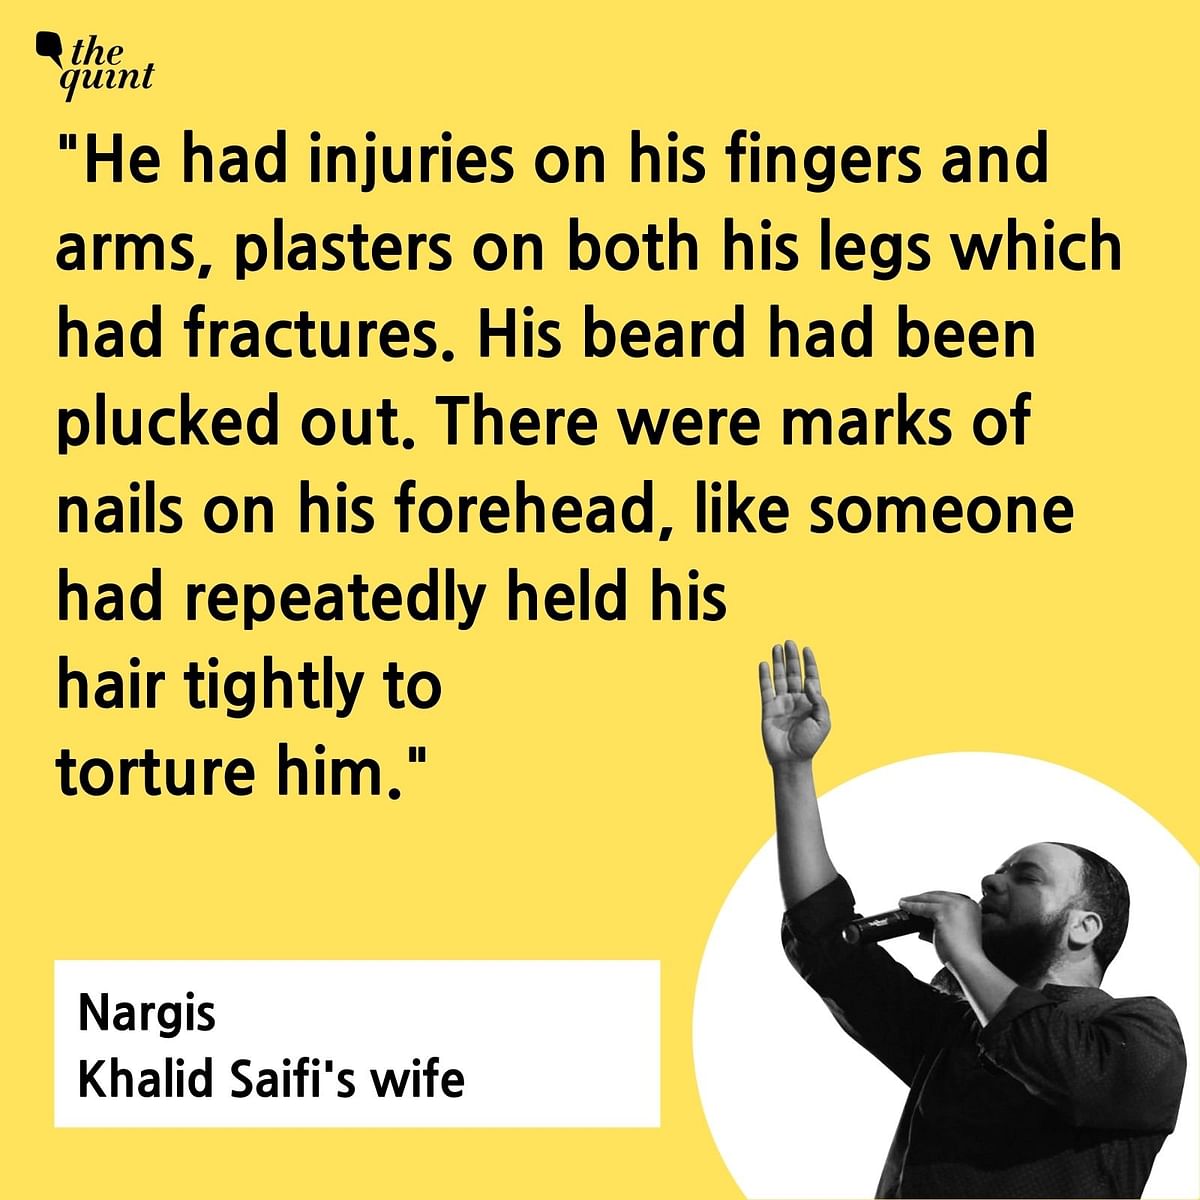 “Khalid’s beard had been plucked, he had nail marks on his forehead and plasters on both his legs,”his wife said.